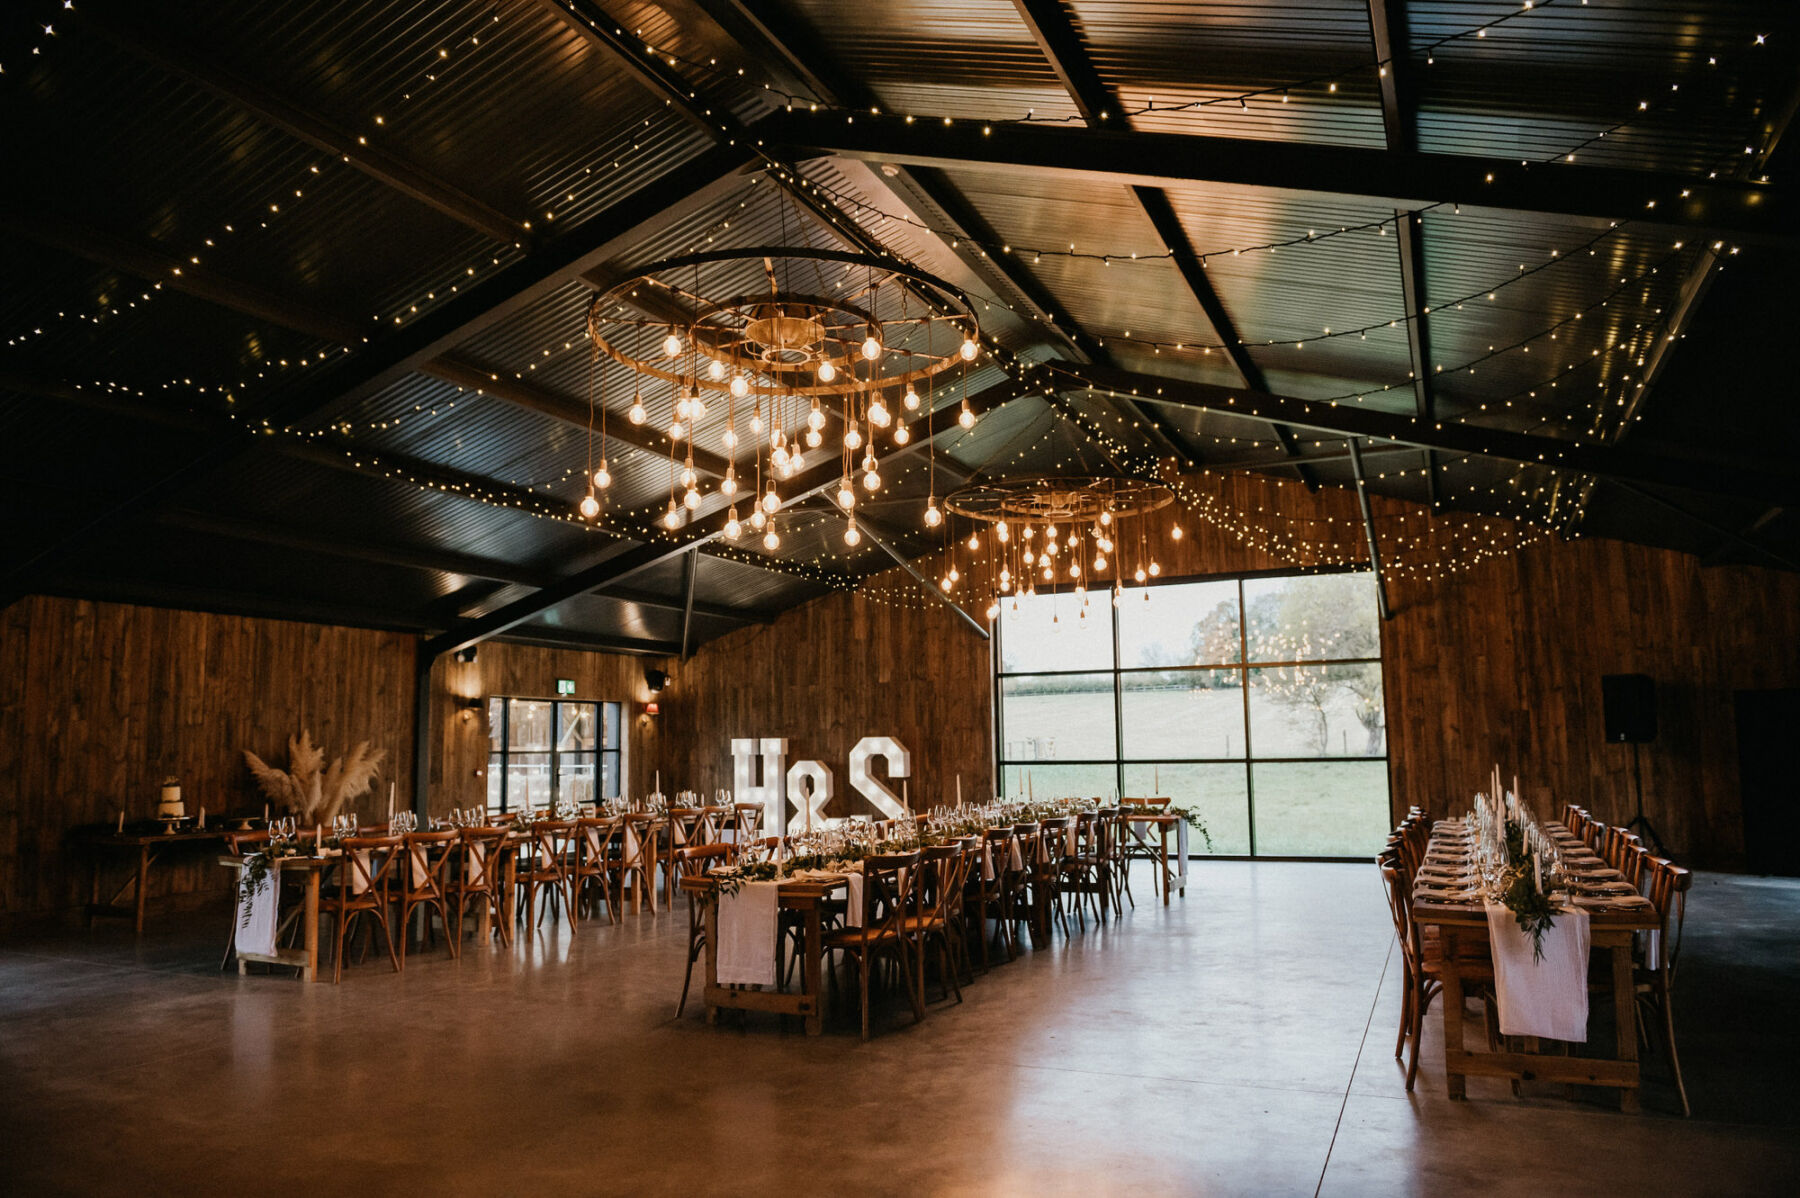 Silchester Farm - Hampshire barn wedding venue with hanging lights. Jessica Grace Photography.